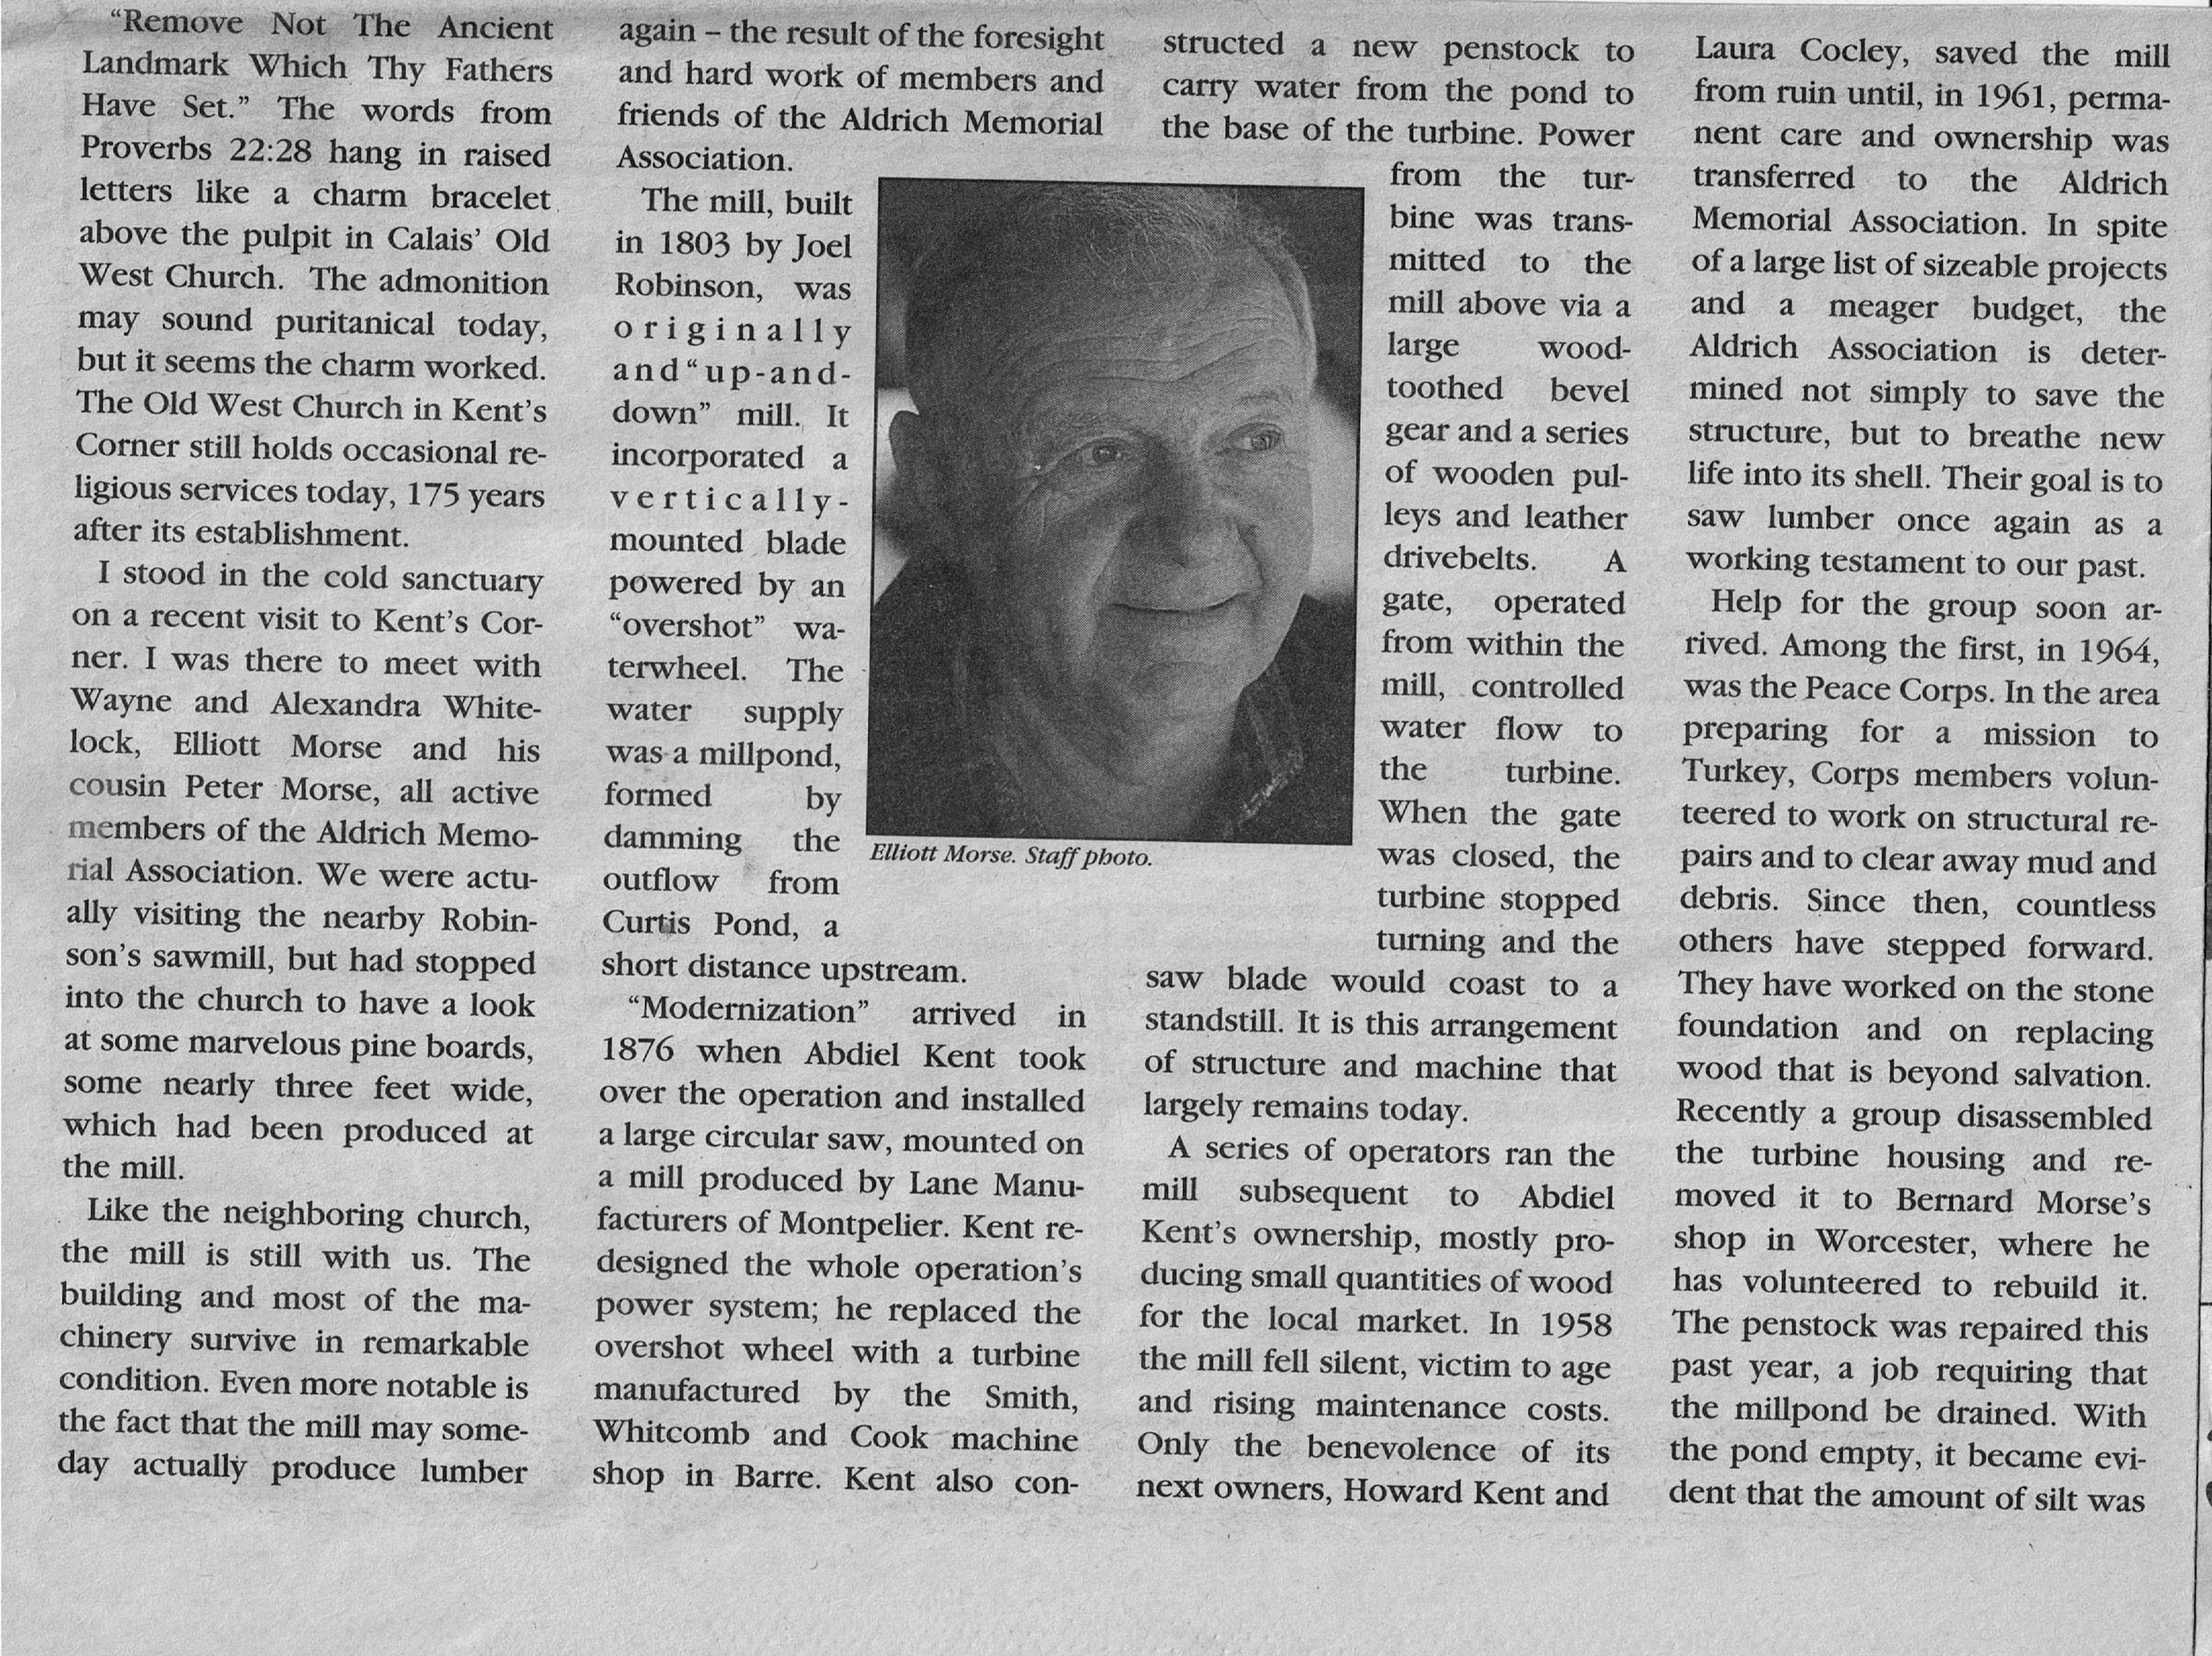 Robinson Sawmill newspaper article excerpt with photo of Elliot Morse.